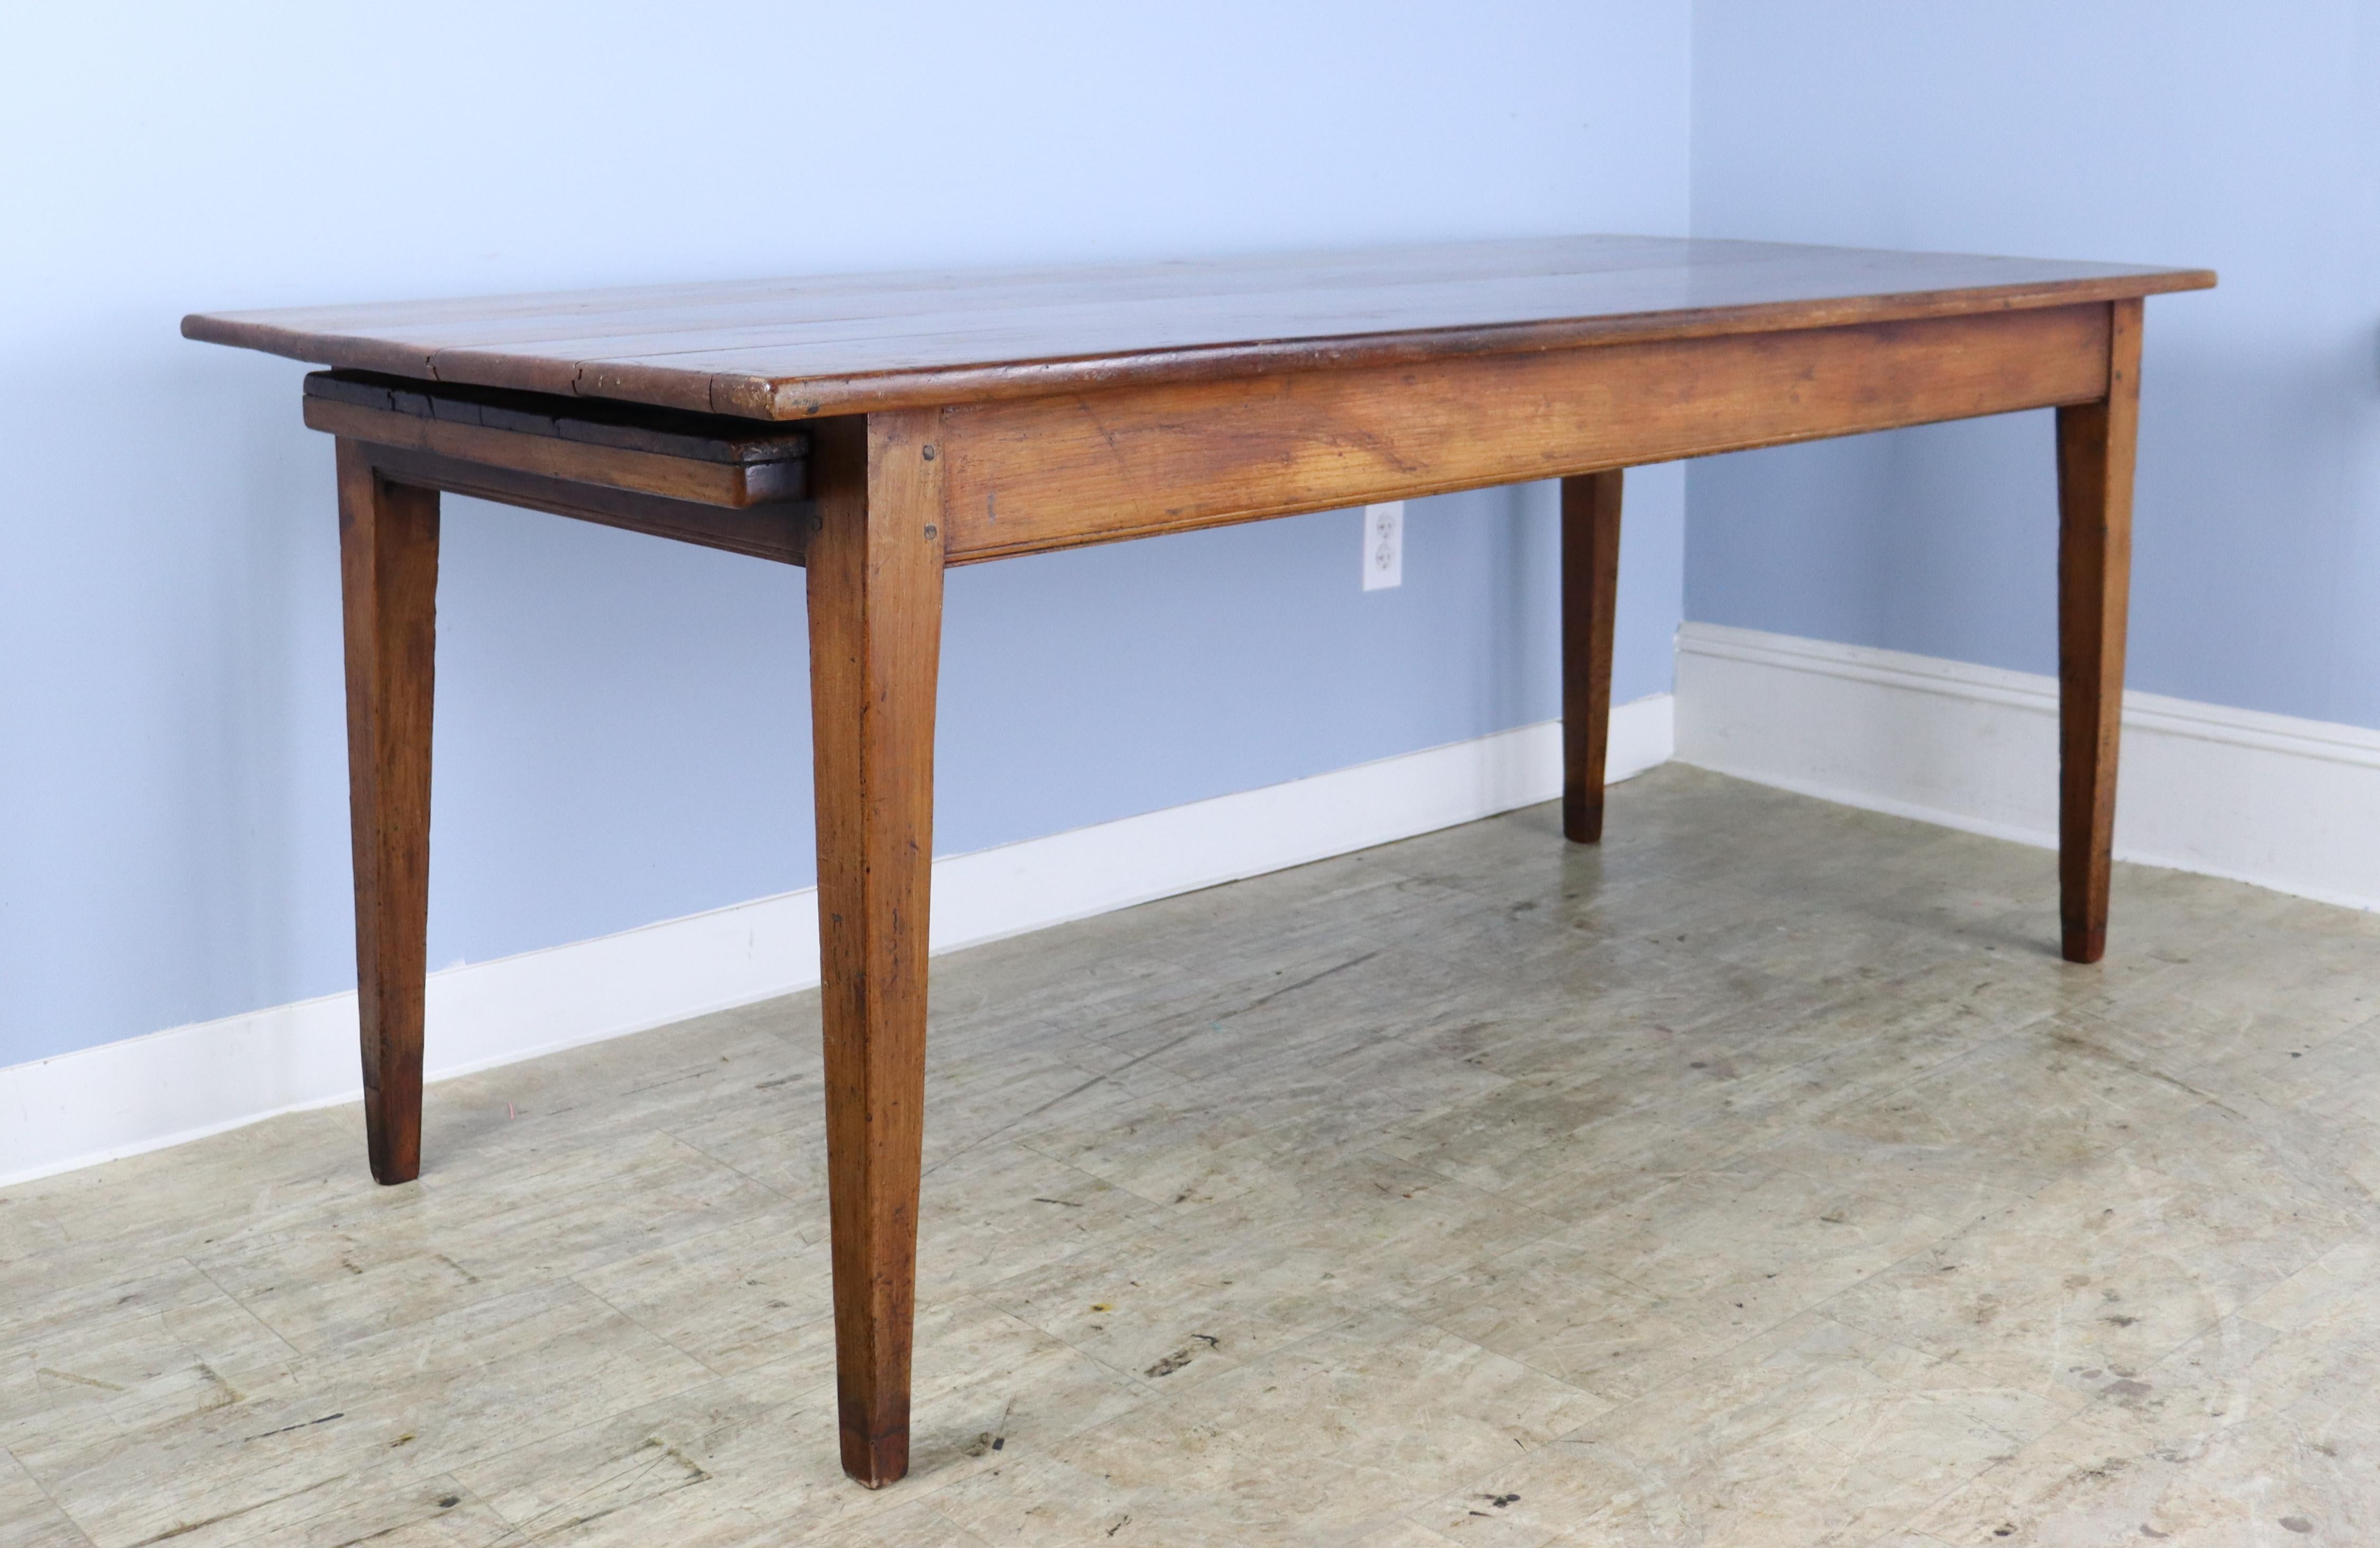 A solid country farm table in warm cherry. The wood has very nice grain, patina and color, and the table's charming drawer and beautiful bread slide add an eye catching design note. Classic tapered legs, well pegged at the base. There are some small